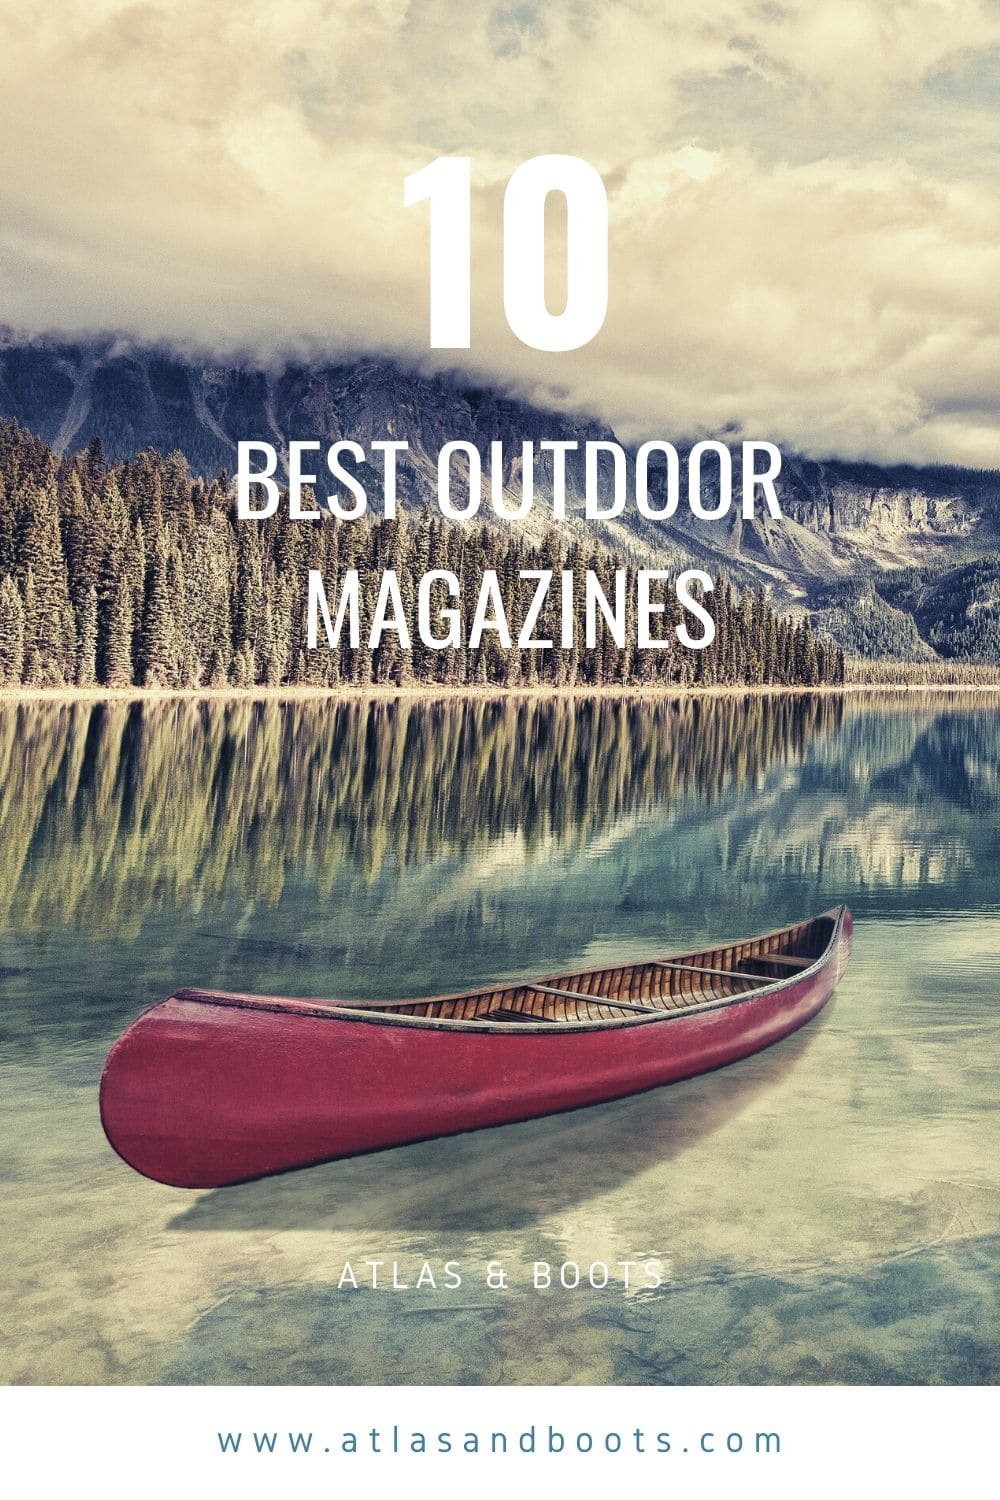 Best outdoor magazines: 10 mags for 